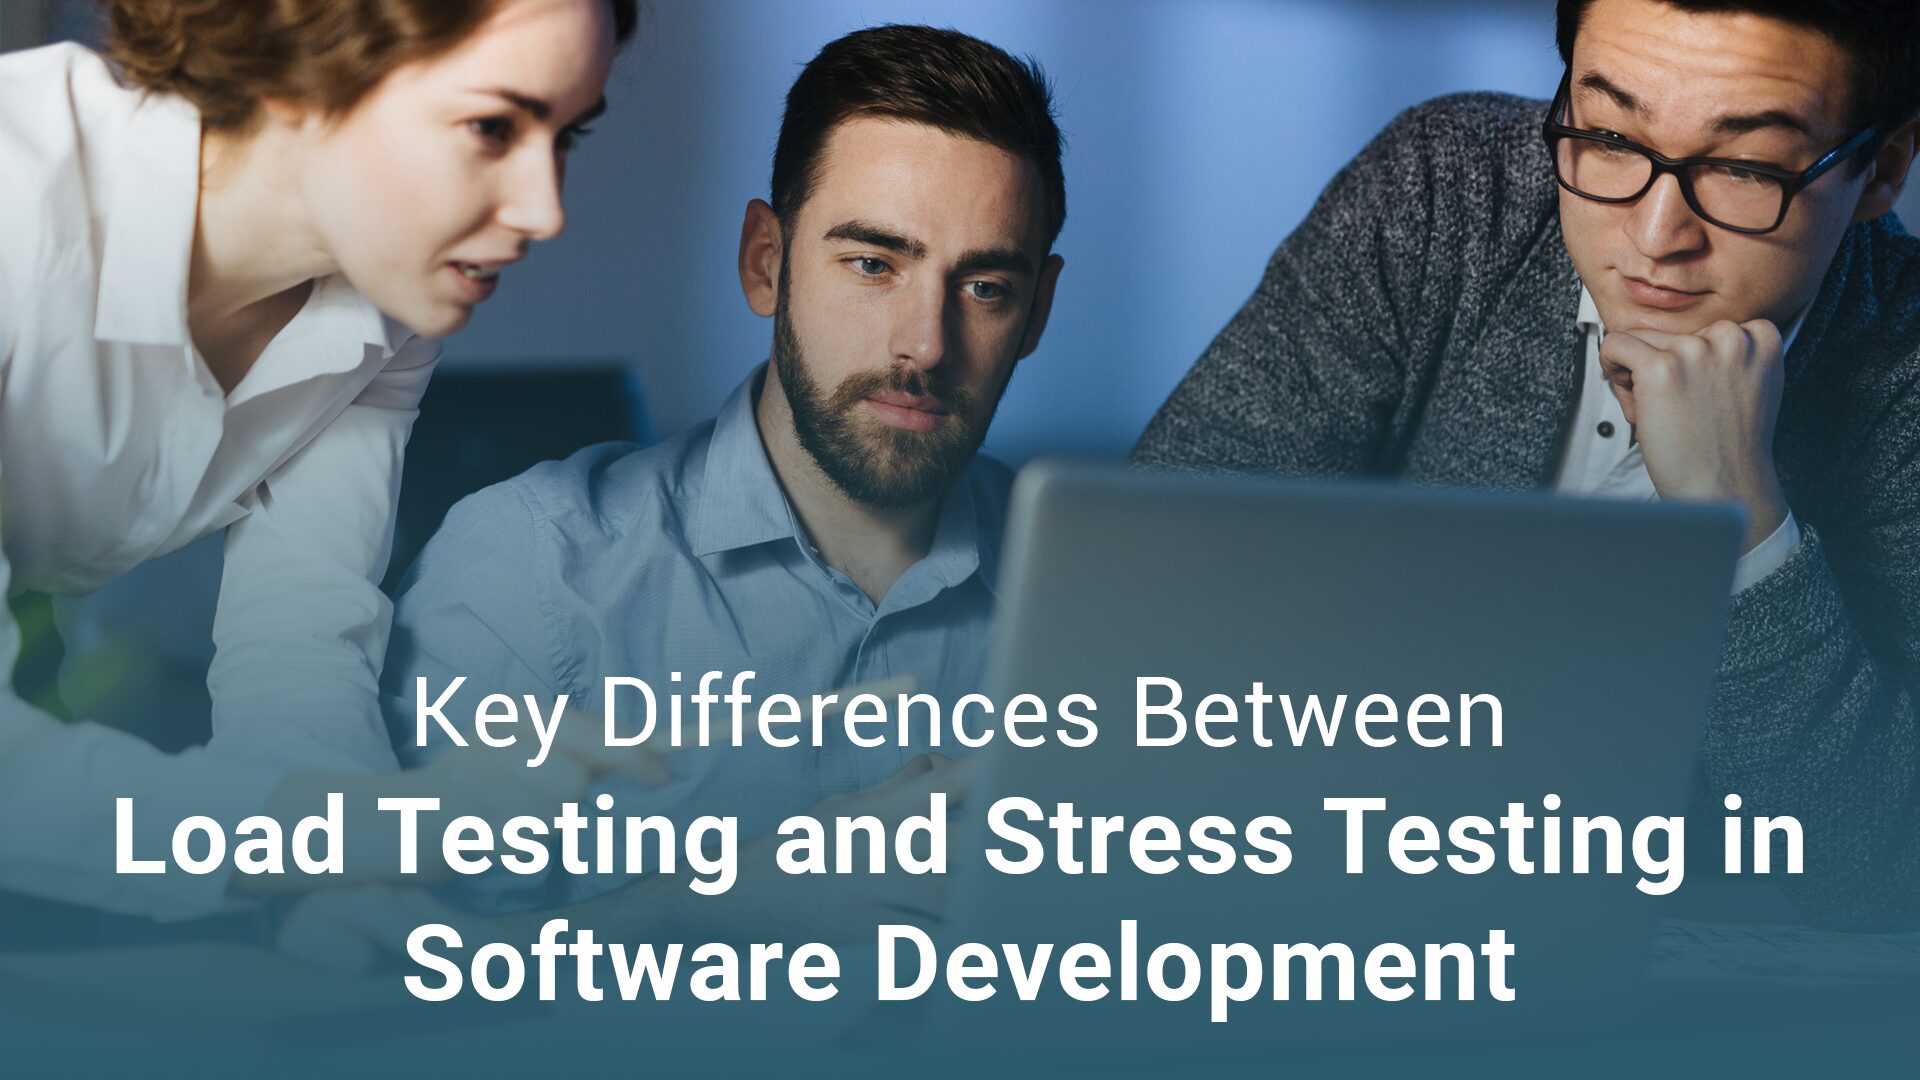 Key Differences Between Load Testing and Stress Testing in Software Development